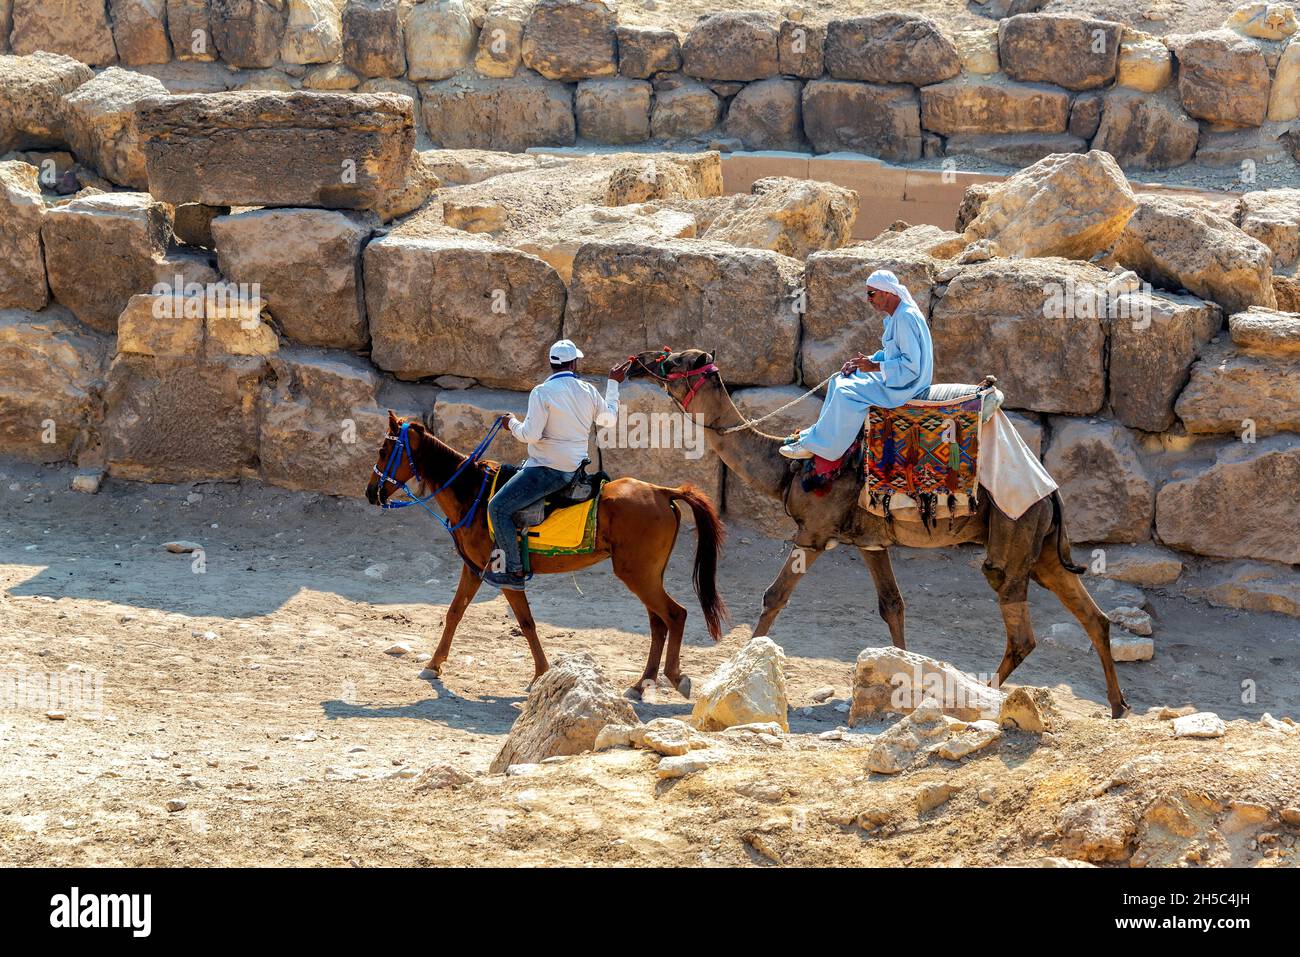 GIZA, EGYPT - JULY 14, 2021: A man on a camel and a man on a horse near the Great Pyramid in Giza, Egypt Stock Photo